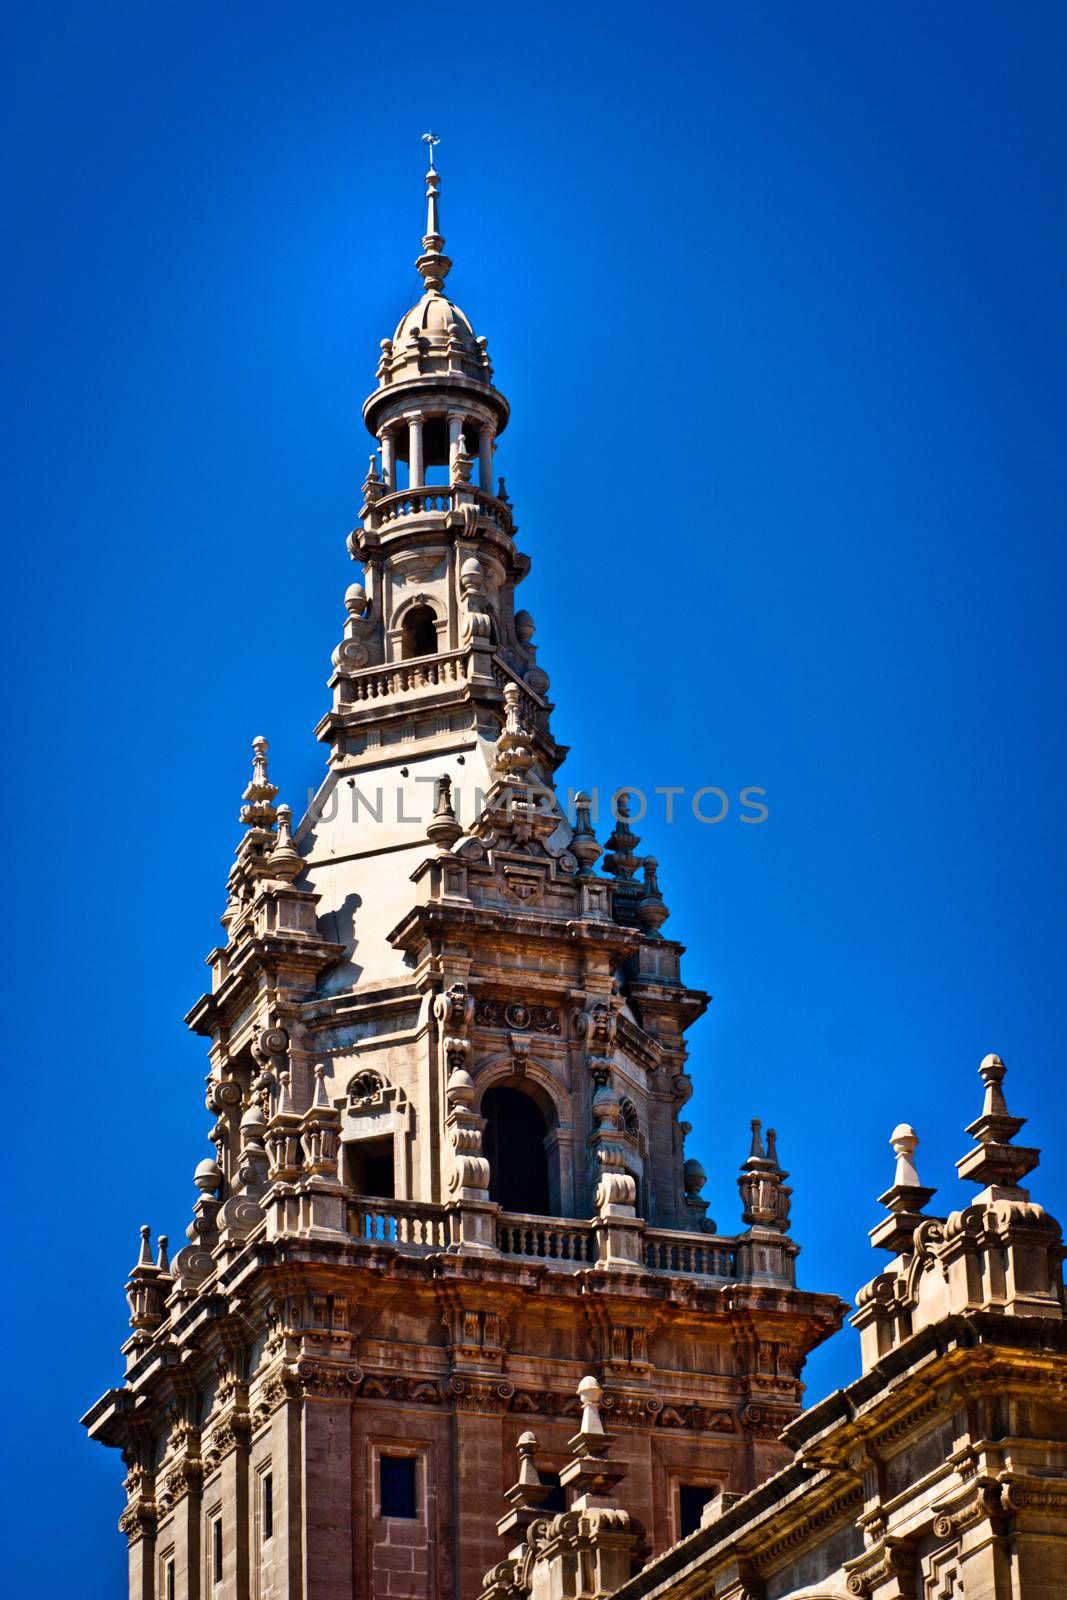 Image of classic Spanish architecture of a building in Barcelona.